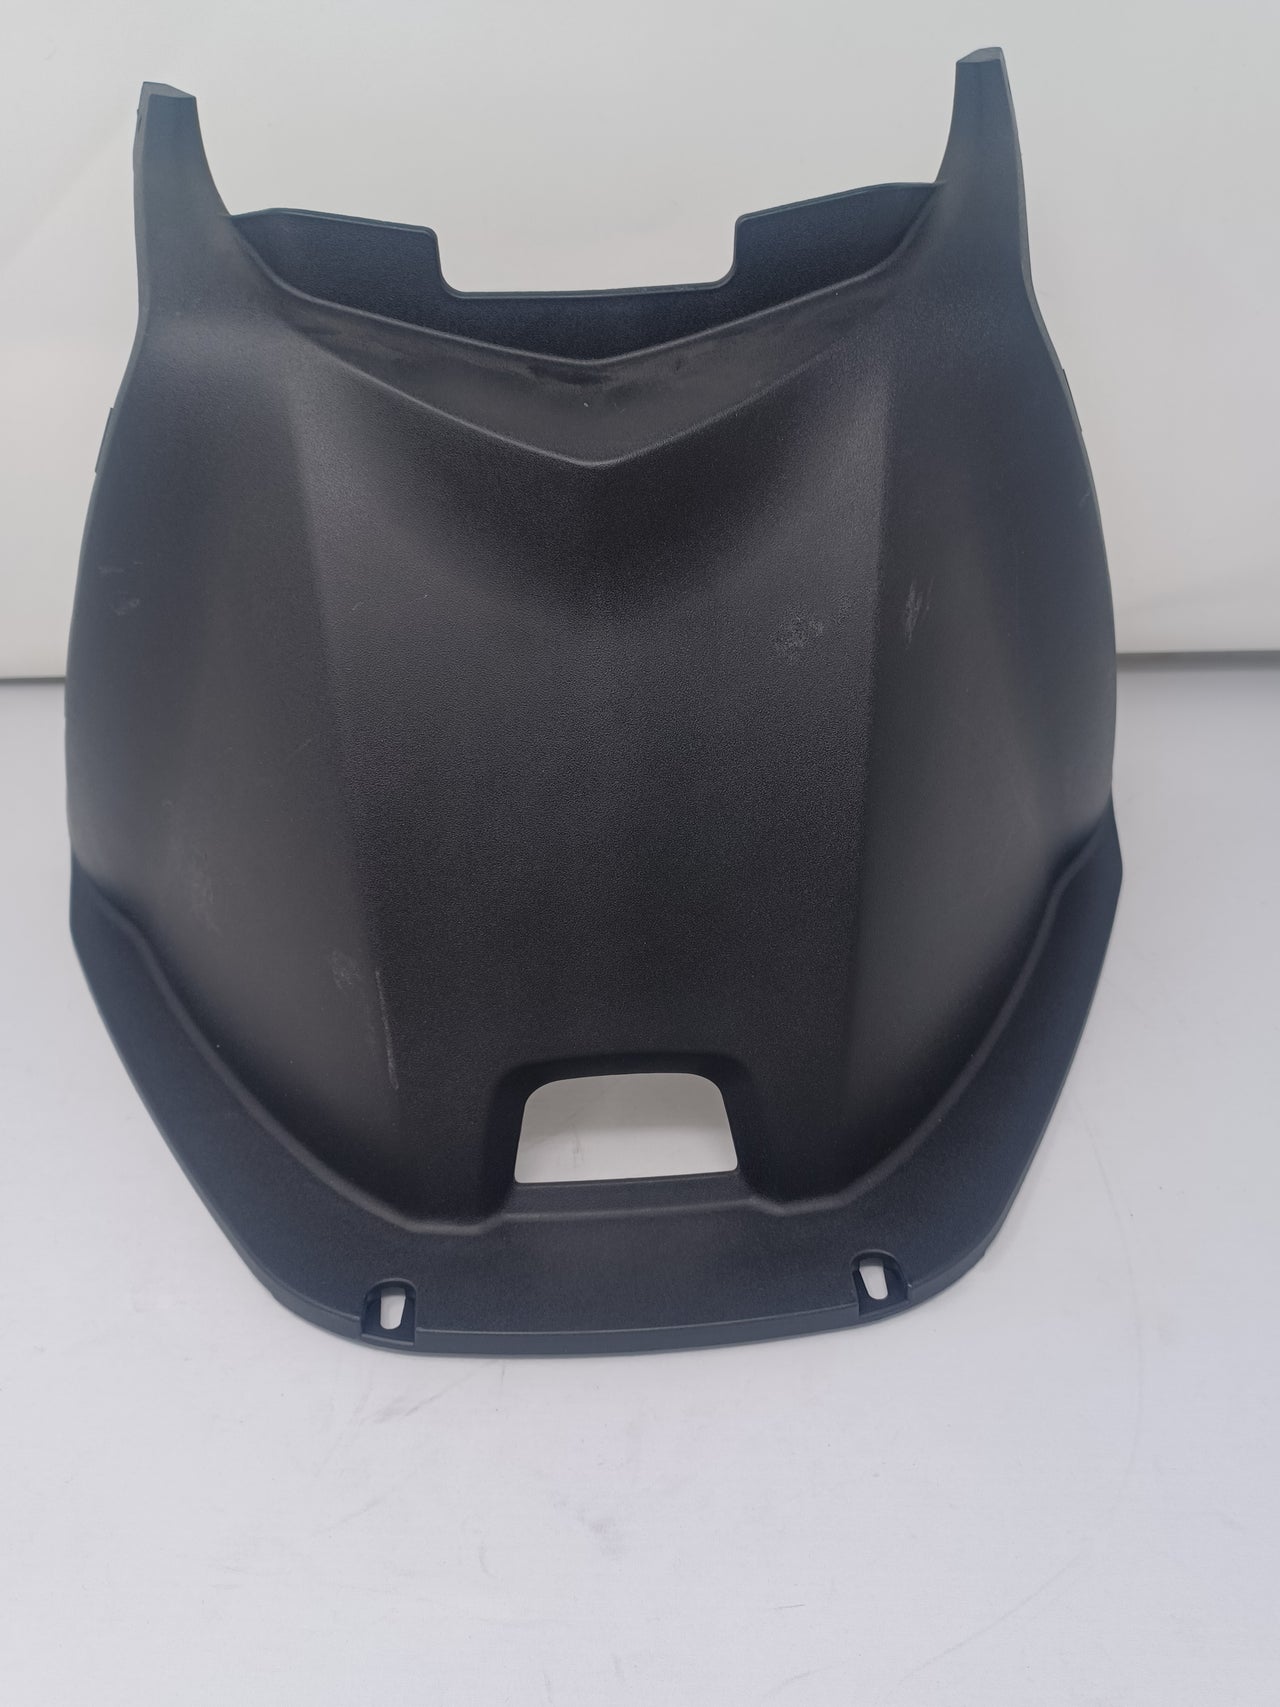 50cc Roma Scooter - Front Cover of Luggage Box 80151-S9E1-0000